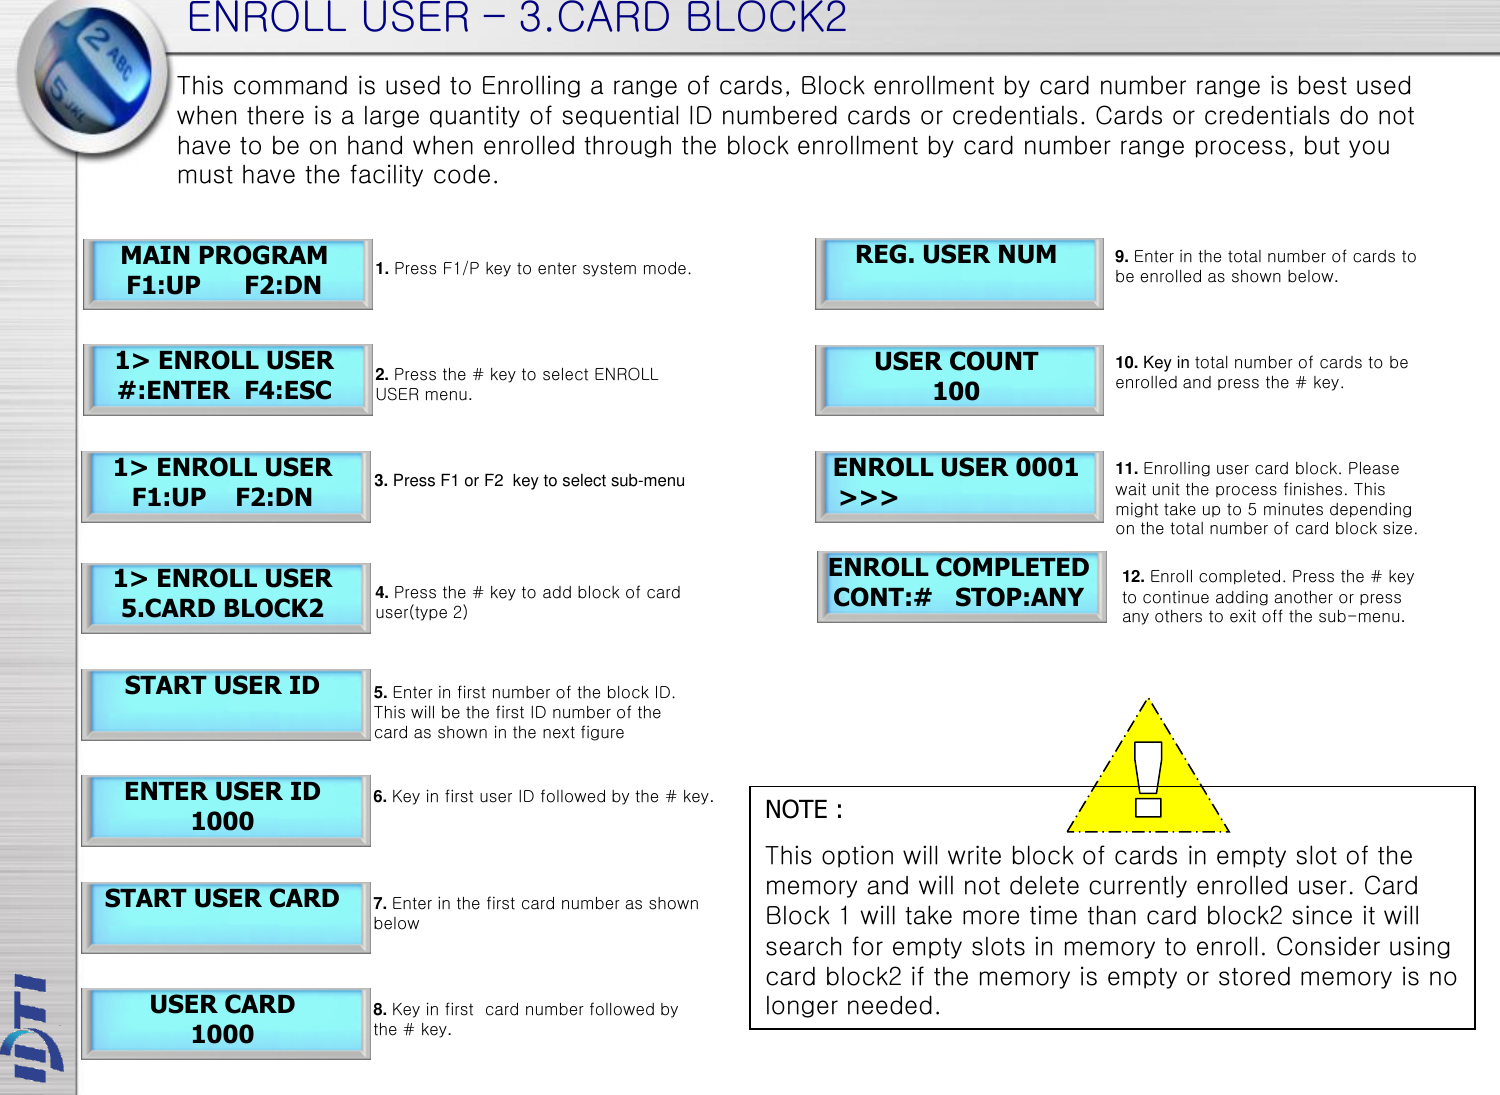 This command is used to Enrolling a range of cards, Block enrollment by card number range is best used when there is a large quantity of sequential ID numbered cards or credentials. Cards or credentials do not have to be on hand when enrolled through the block enrollment by card number range process, but you must have the facility code.  START USER ID ENTER USER ID 1000 START USER CARD USER CARD 1000 REG. USER NUM ENROLL USER 0001   &gt;&gt;&gt; 1&gt; ENROLL USER 5.CARD BLOCK2 USER COUNT 100 ENROLL COMPLETED CONT:#   STOP:ANY MAIN PROGRAM F1:UP      F2:DN 1&gt; ENROLL USER #:ENTER  F4:ESC 1&gt; ENROLL USER F1:UP    F2:DN ENROLL USER – 3.CARD BLOCK2 6. Key in first user ID followed by the # key. 7. Enter in the first card number as shown  below 8. Key in first  card number followed by the # key.  1. Press F1/P key to enter system mode. 2. Press the # key to select ENROLL USER menu. 4. Press the # key to add block of card  user(type 2) 5. Enter in first number of the block ID. This will be the first ID number of the card as shown in the next figure 3. Press F1 or F2  key to select sub-menu 9. Enter in the total number of cards to be enrolled as shown below.  10. Key in total number of cards to be enrolled and press the # key. 11. Enrolling user card block. Please wait unit the process finishes. This might take up to 5 minutes depending on the total number of card block size. 12. Enroll completed. Press the # key to continue adding another or press any others to exit off the sub-menu.  NOTE : This option will write block of cards in empty slot of the memory and will not delete currently enrolled user. Card Block 1 will take more time than card block2 since it will search for empty slots in memory to enroll. Consider using card block2 if the memory is empty or stored memory is no longer needed. 